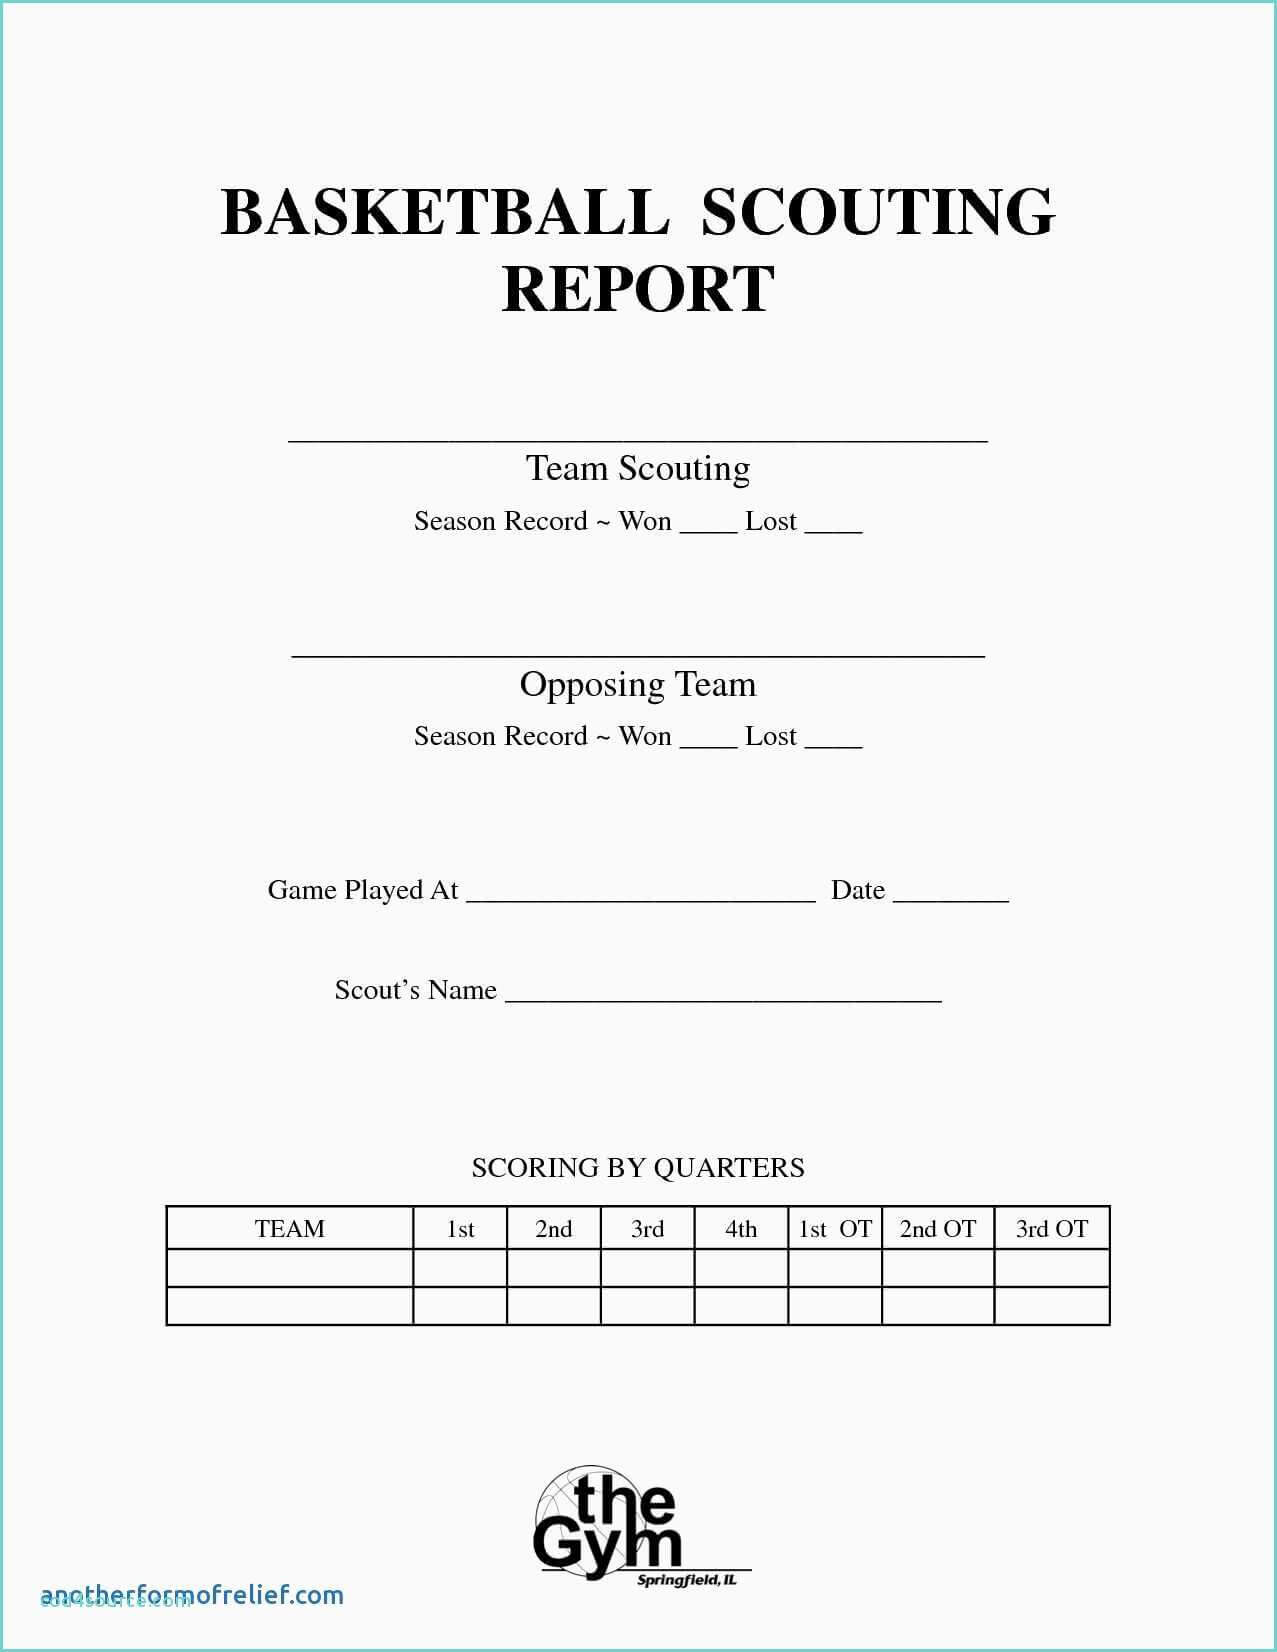 Bowling Spreadsheet And Basketball Scouting Report Template Throughout Basketball Scouting Report Template